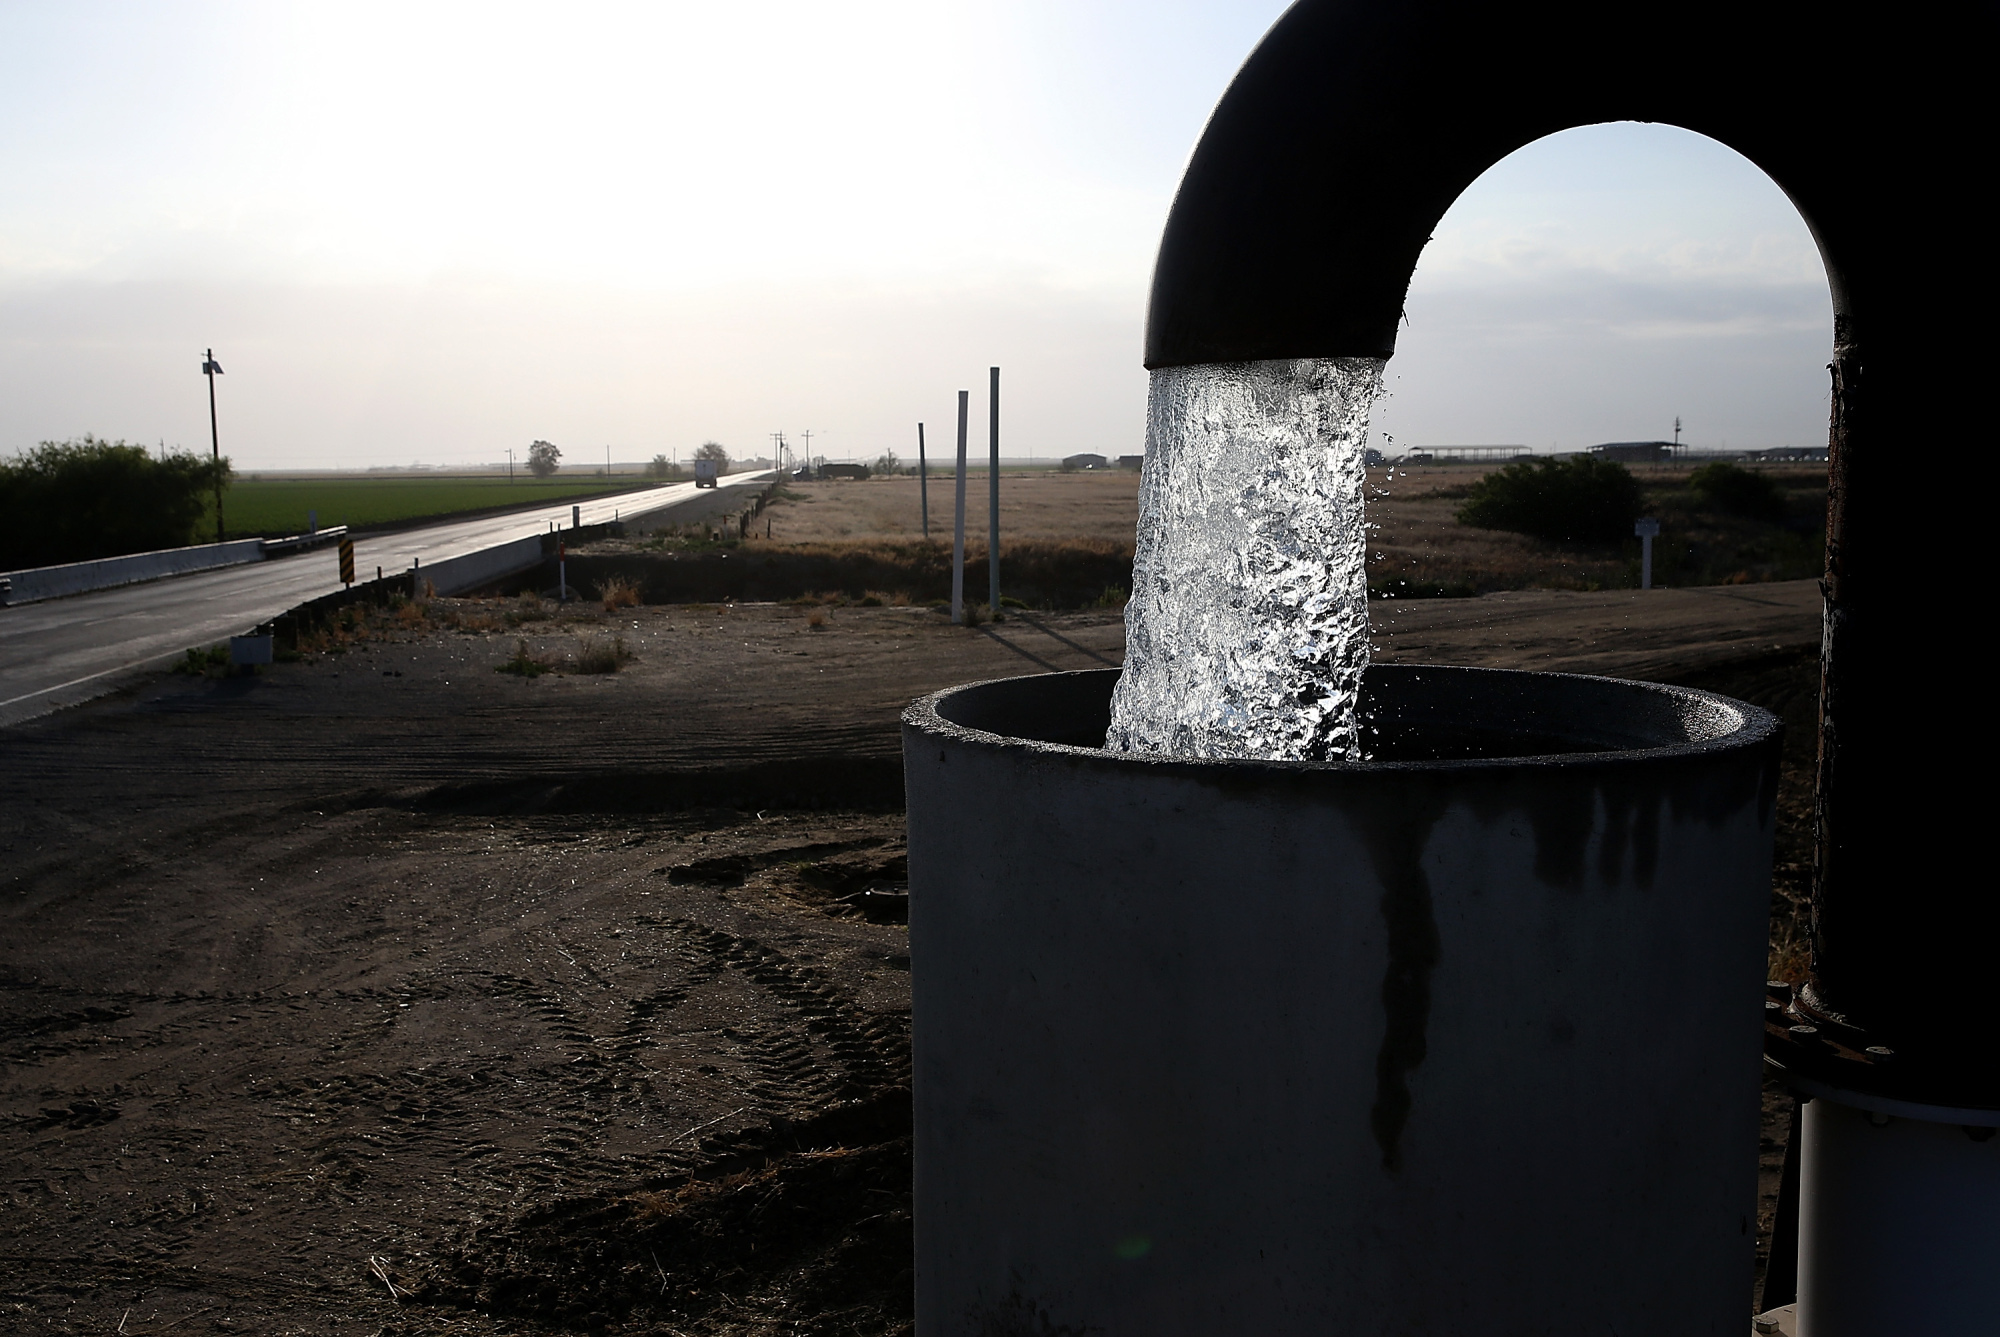 Well water is pumped from the ground in April 2015 in Tulare, California. 
